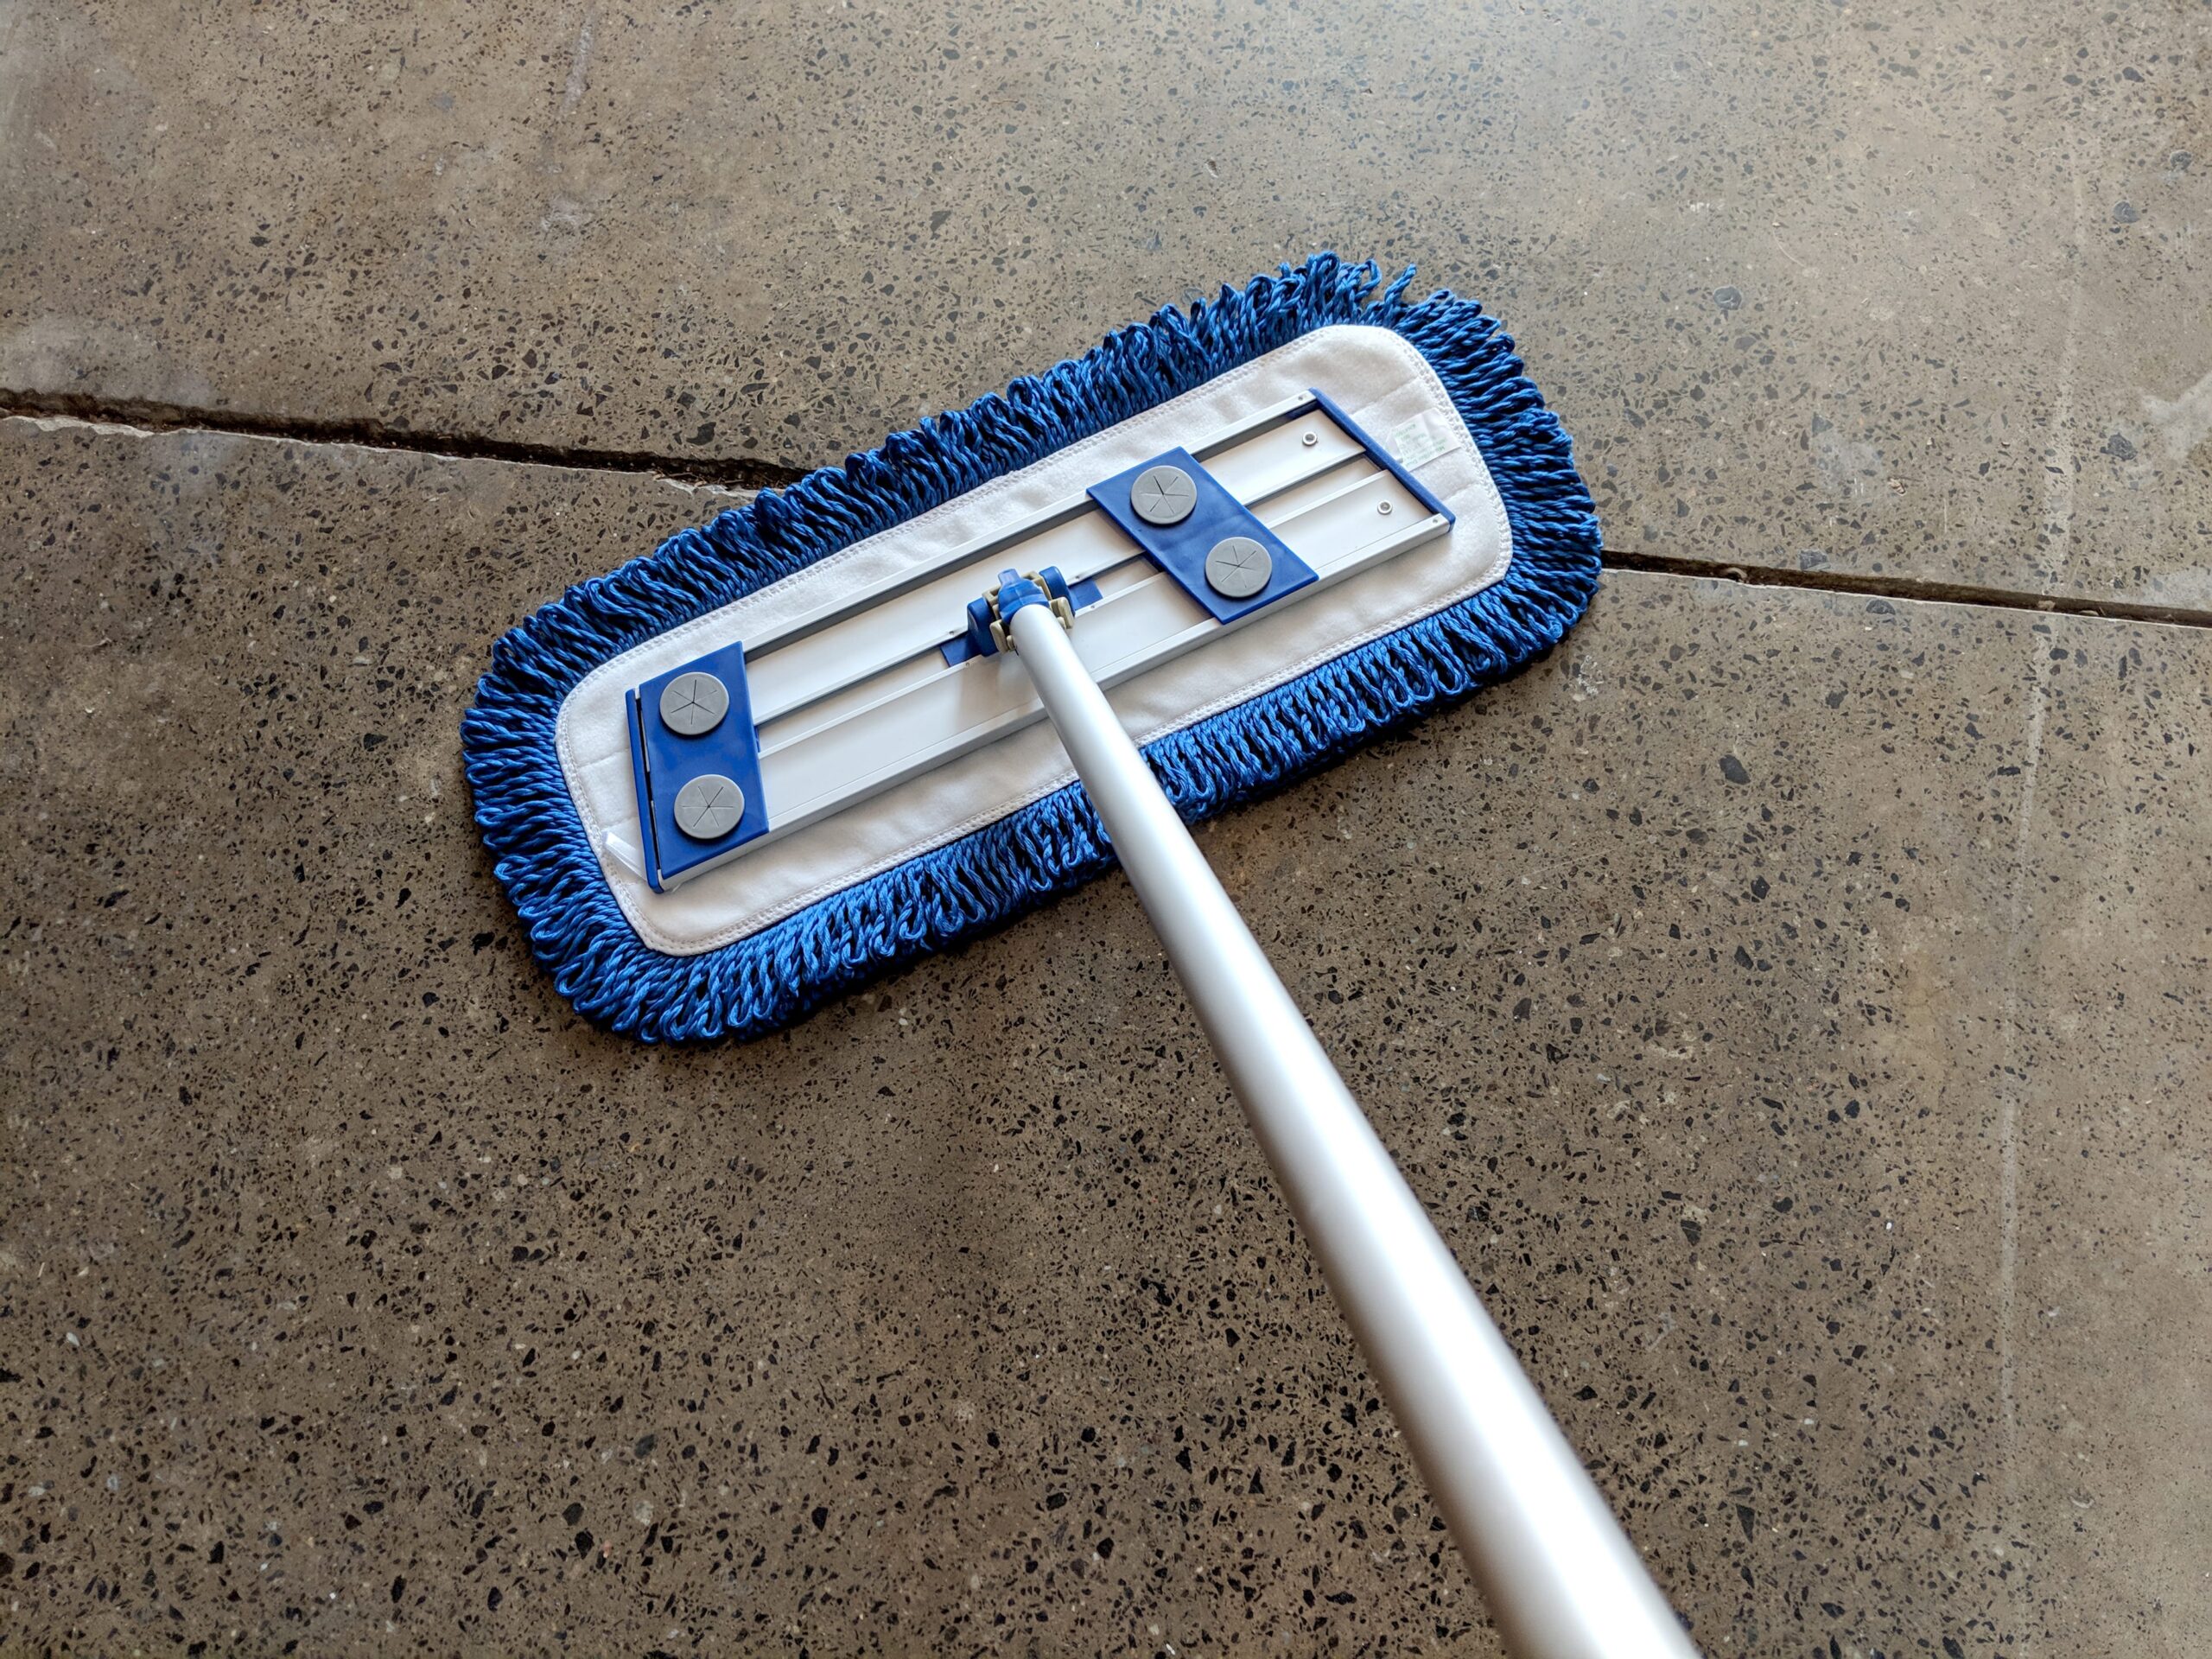 Fringed Dust Mops with Hook and Loop Backing on concrete